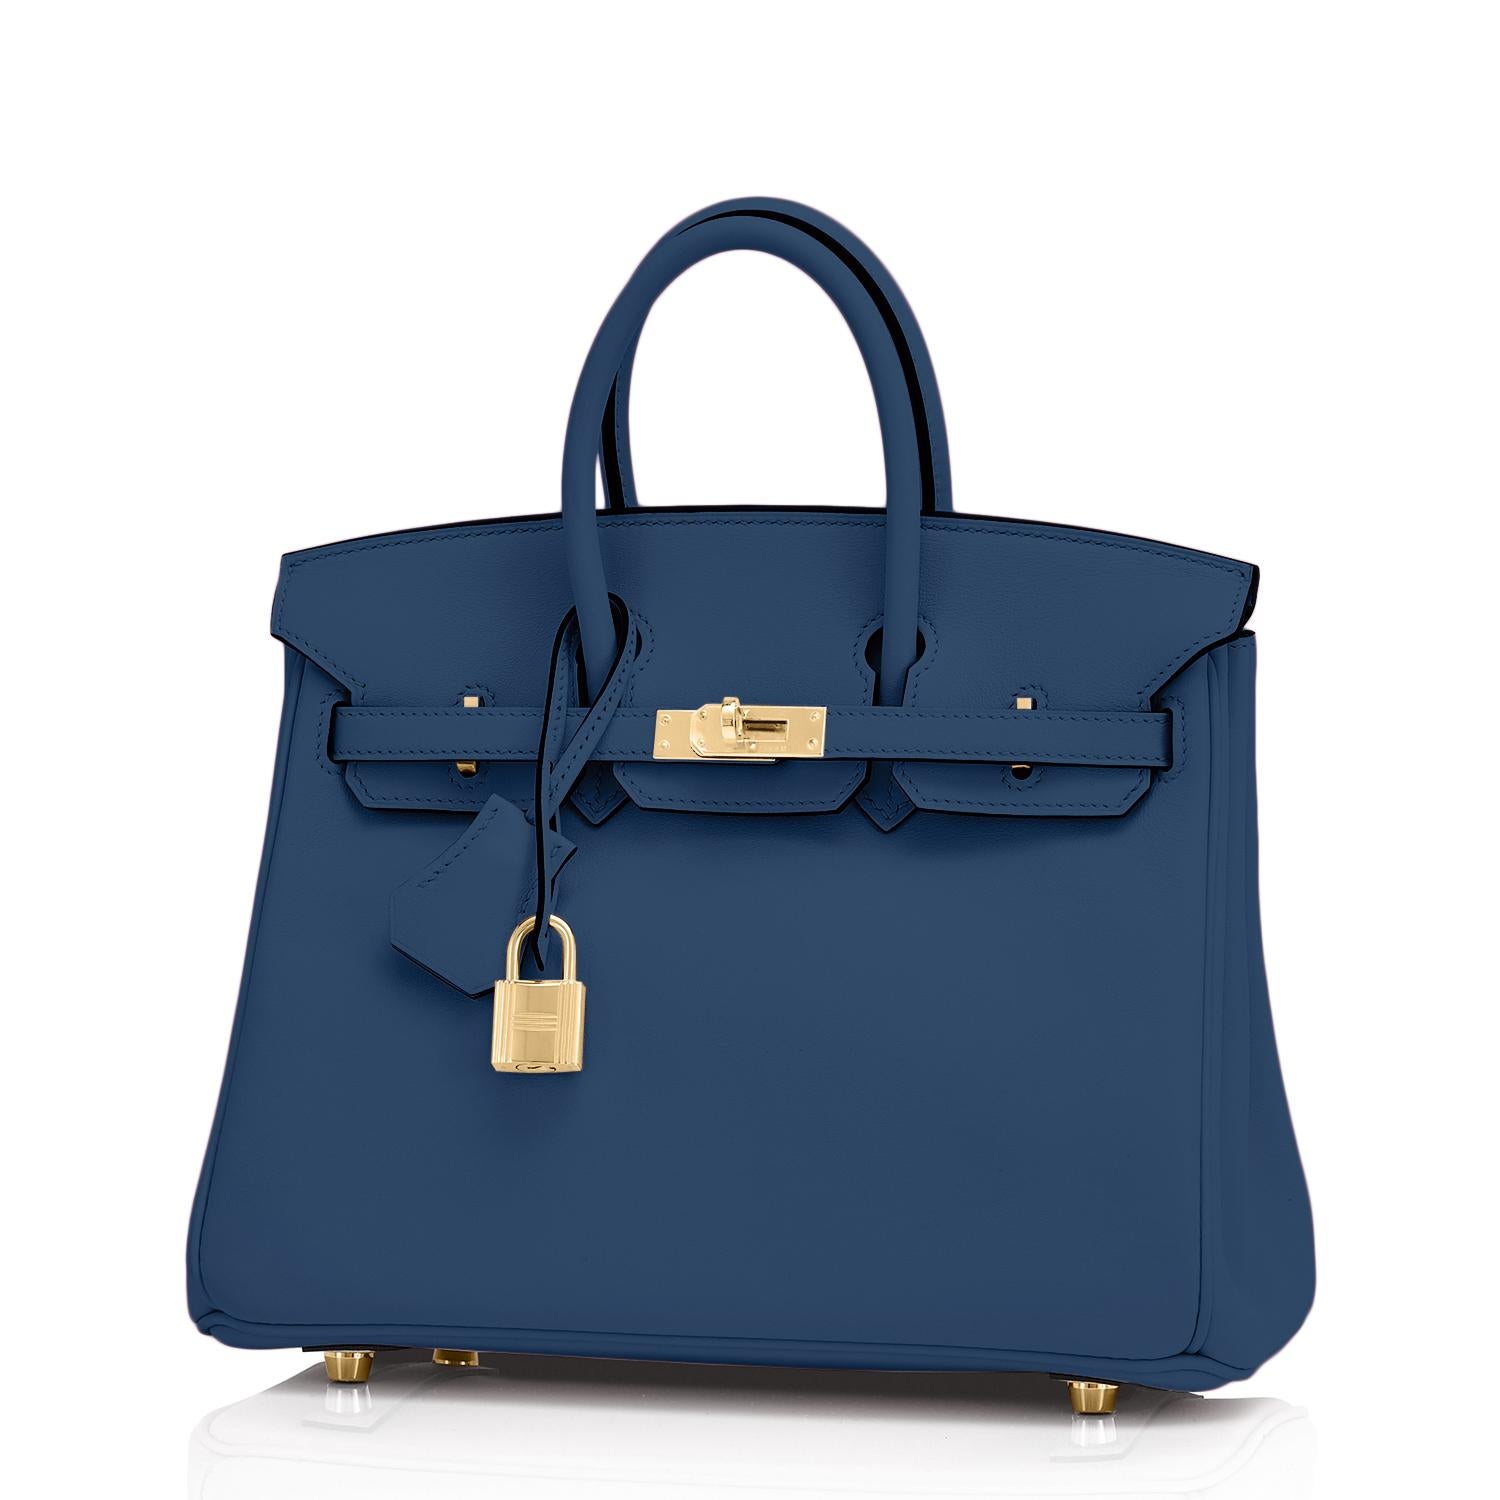 Hermes Birkin 25 Deep Blue Jewel Toned Navy Bag Gold Hardware Z Stamp, 2021
Sublime jewel-tone Deep Blue is gorgeous and perfectly on point for the top color trend of the new year.
Brand New in Box. Store Fresh. Pristine Condition (with plastic on